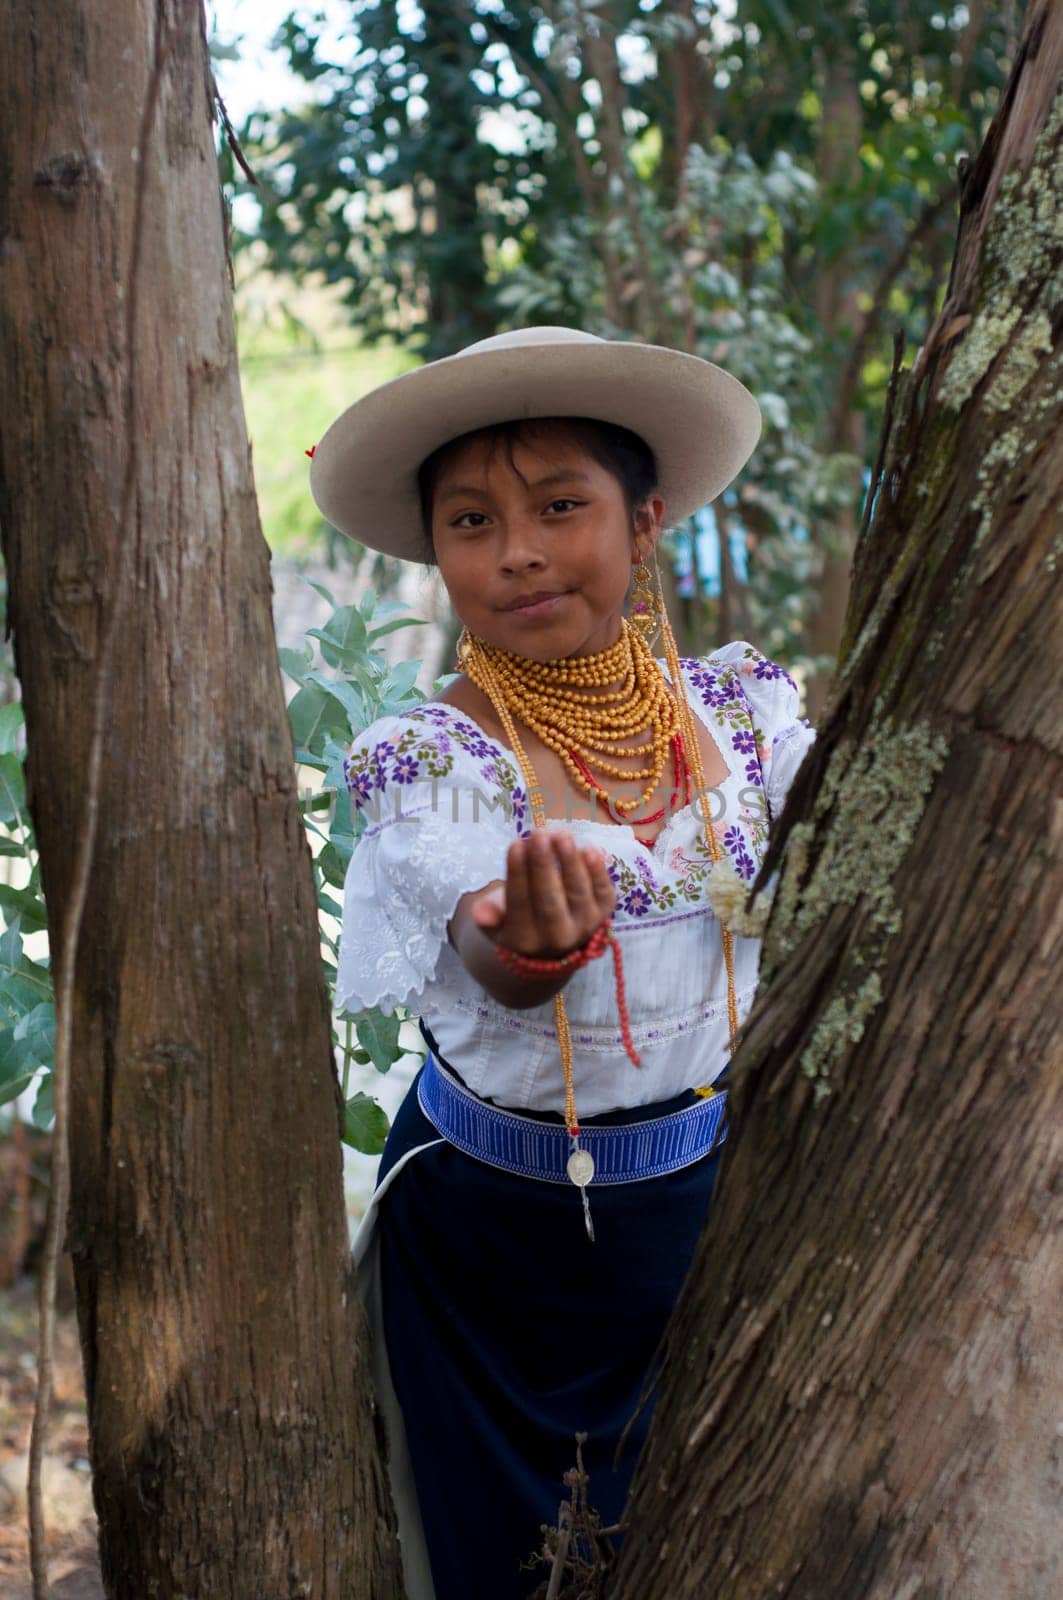 A 13-Year-Old Indigenous Stunner in Ecuadorian Traditional Garb, Posing with a Heartfelt Smile Amidst Towering Trees and Nature's Treasures by Raulmartin